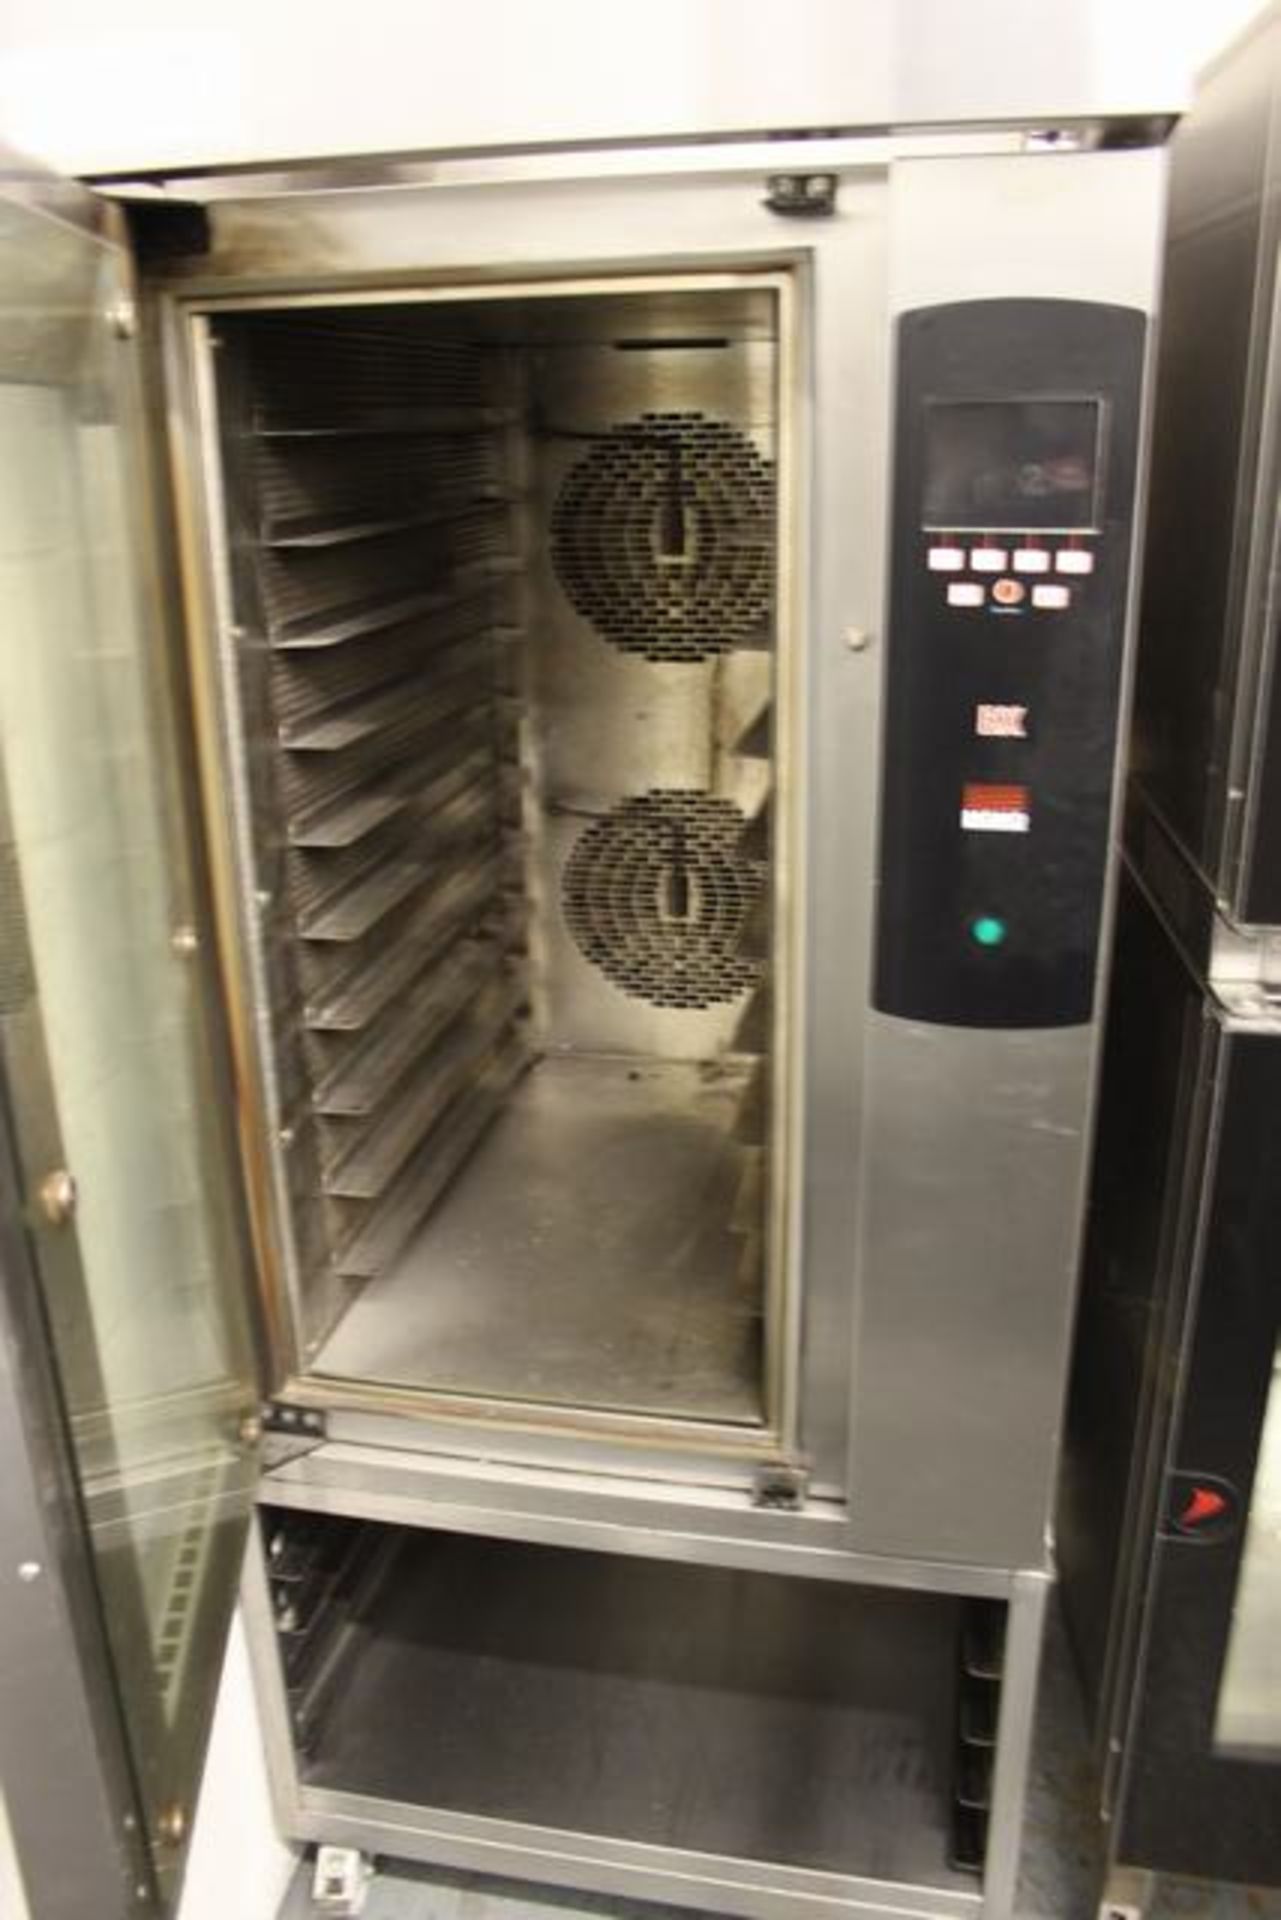 Mono BX type FG150 10 grid bake off oven takes 60 x 40 trays s/n 021997 3 phase - Image 3 of 3